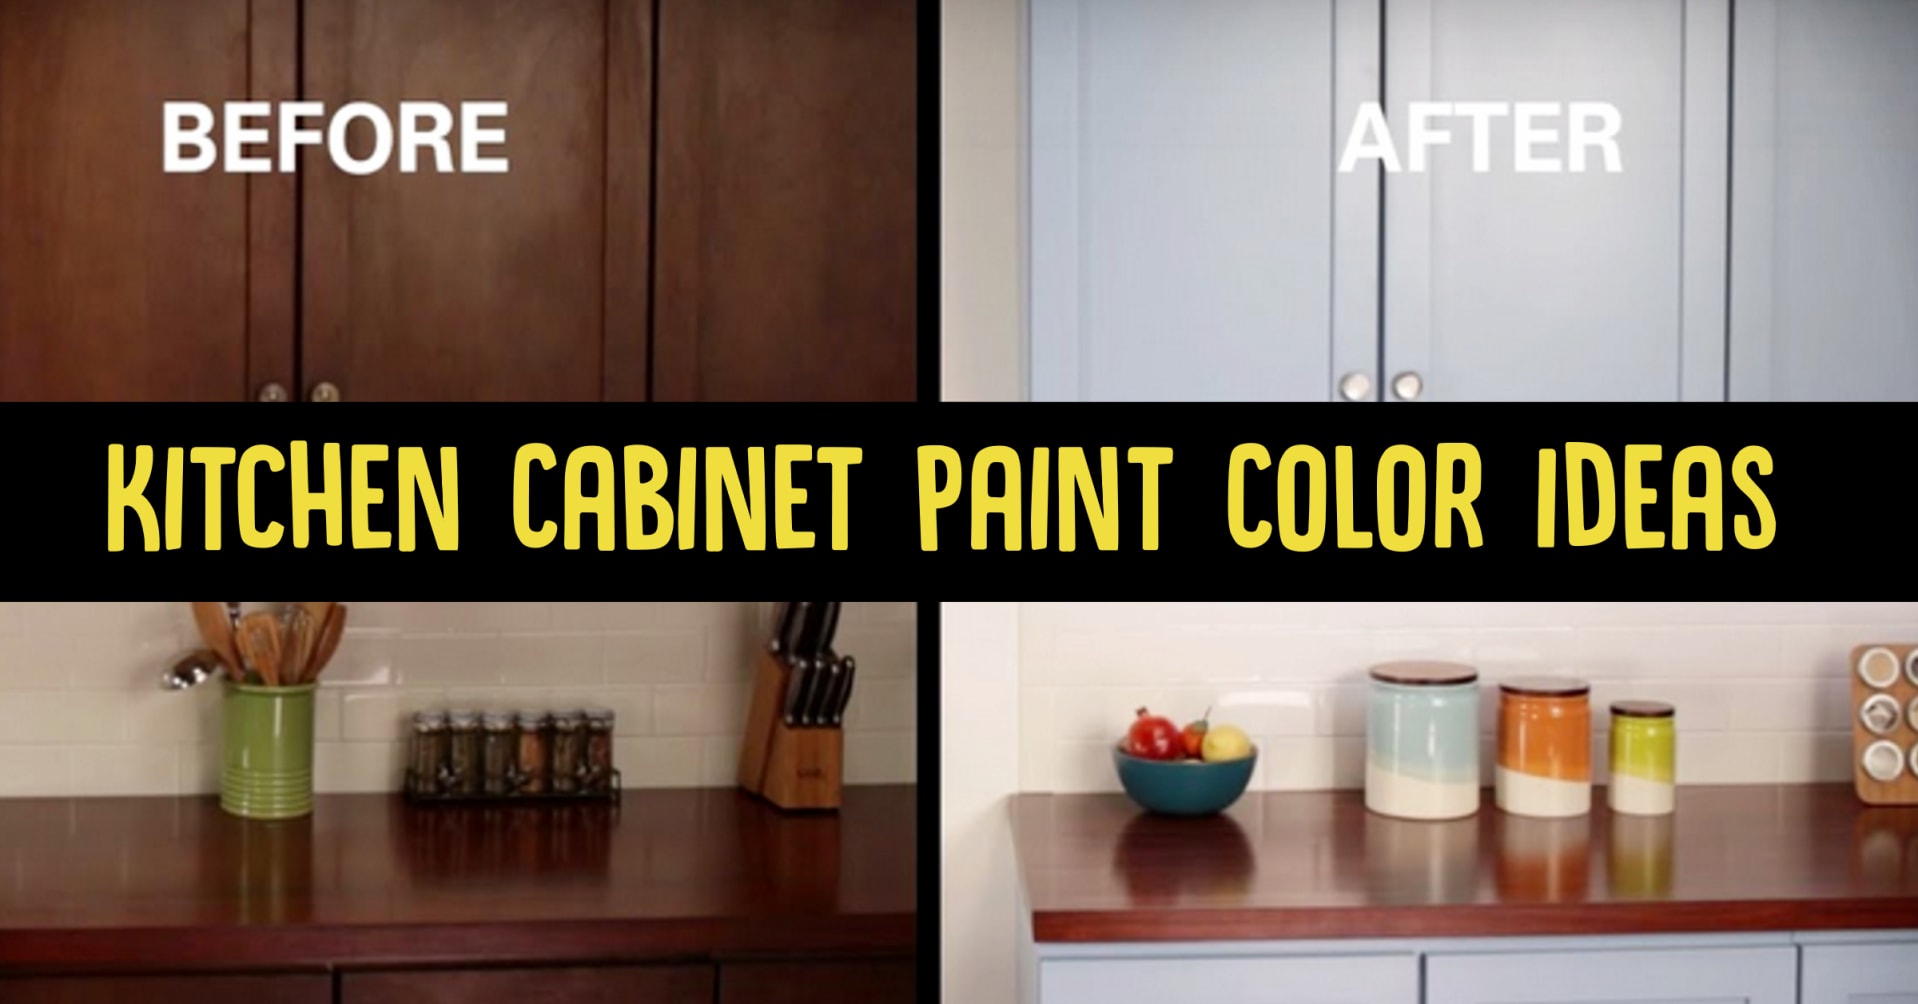 Painting Kitchen Cabinets Ideas Before and AFTER! Paint colors for kitchen cabinets - pictures - top paint colors and most popular painted cabinet colors this year